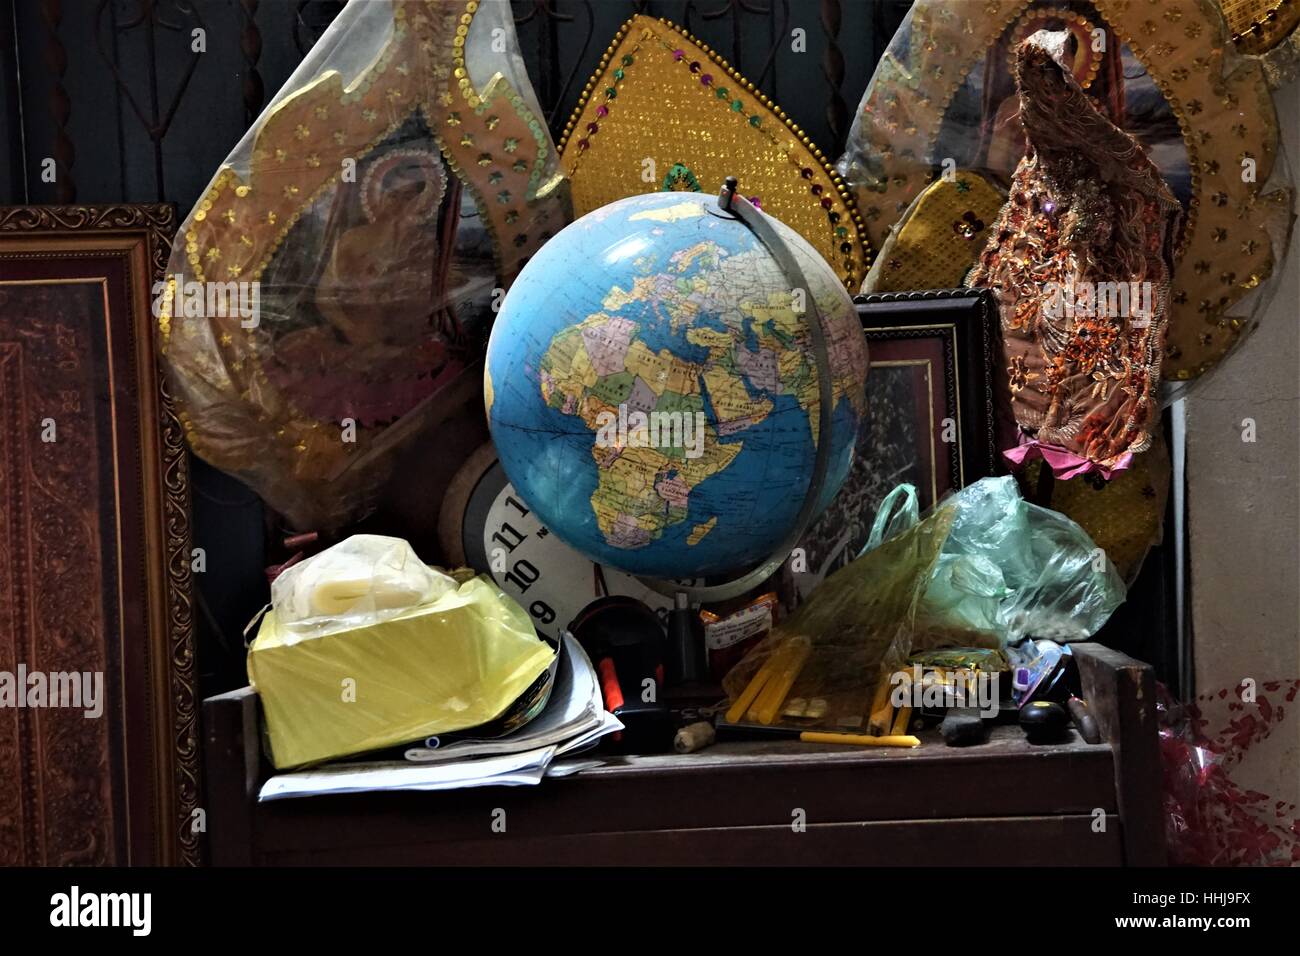 A Monks Cluttered Table with a Globe on it - in the Store Room of a Temple / Pagoda in Battambang Cambodia Stock Photo